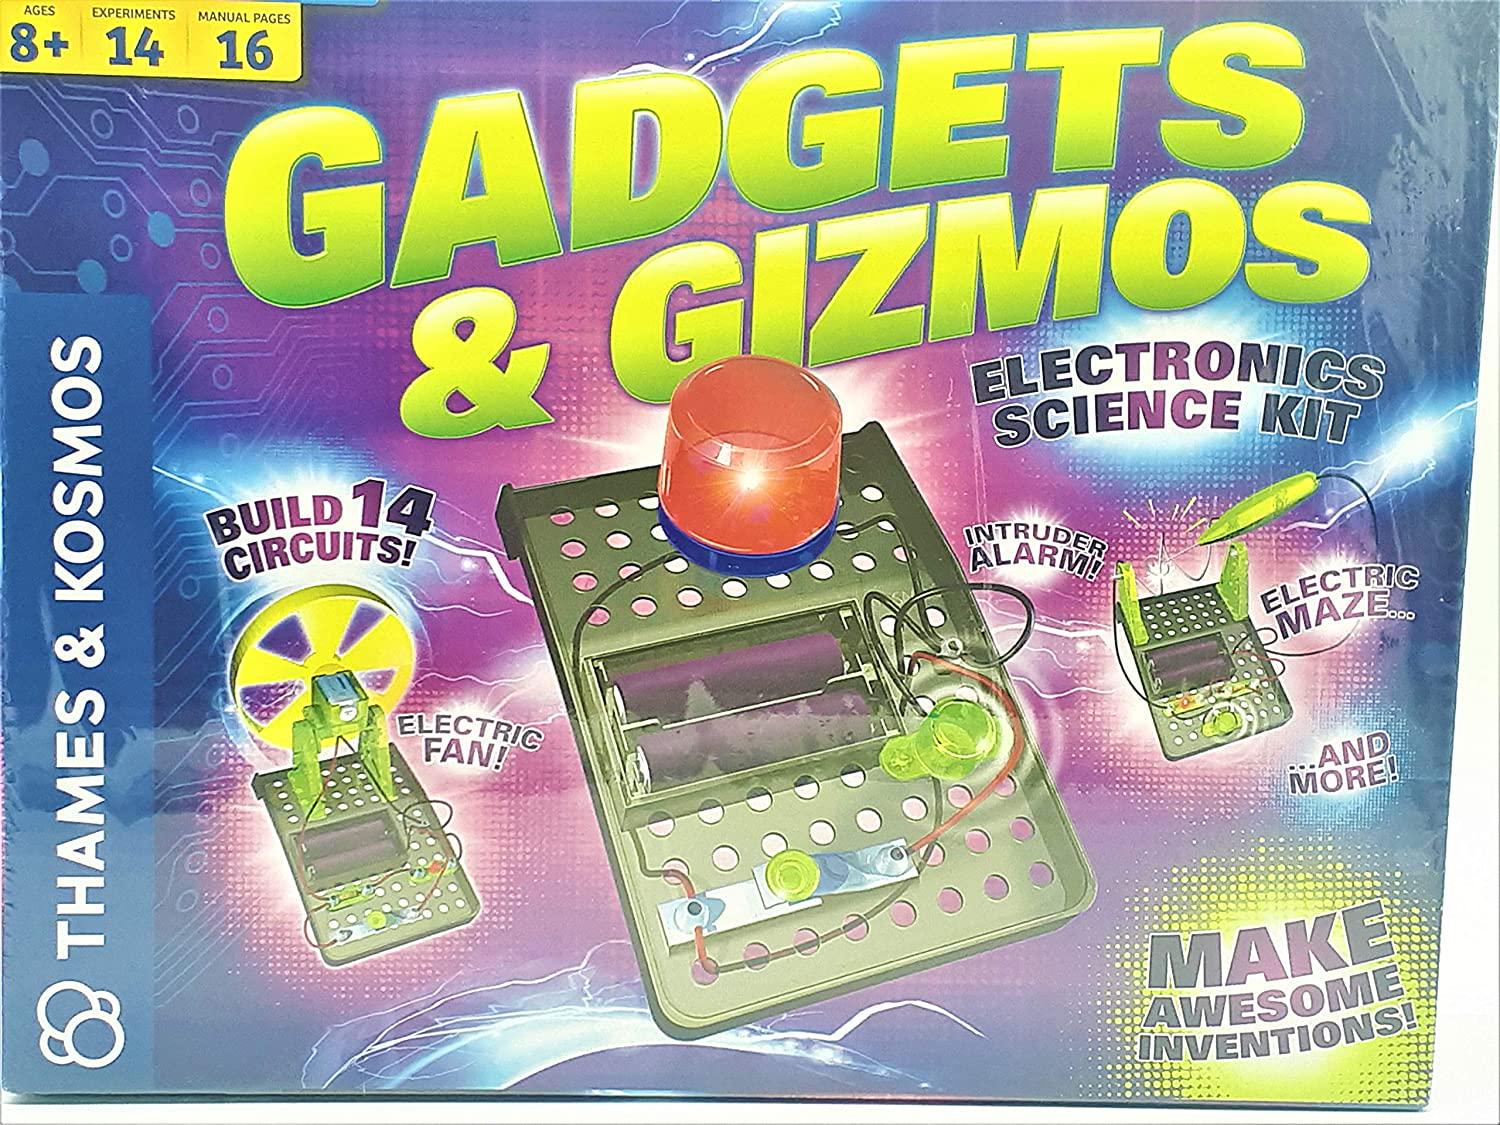 THAMES & KOSMOS, Gadgets and Gizmos Electronics Science Kit